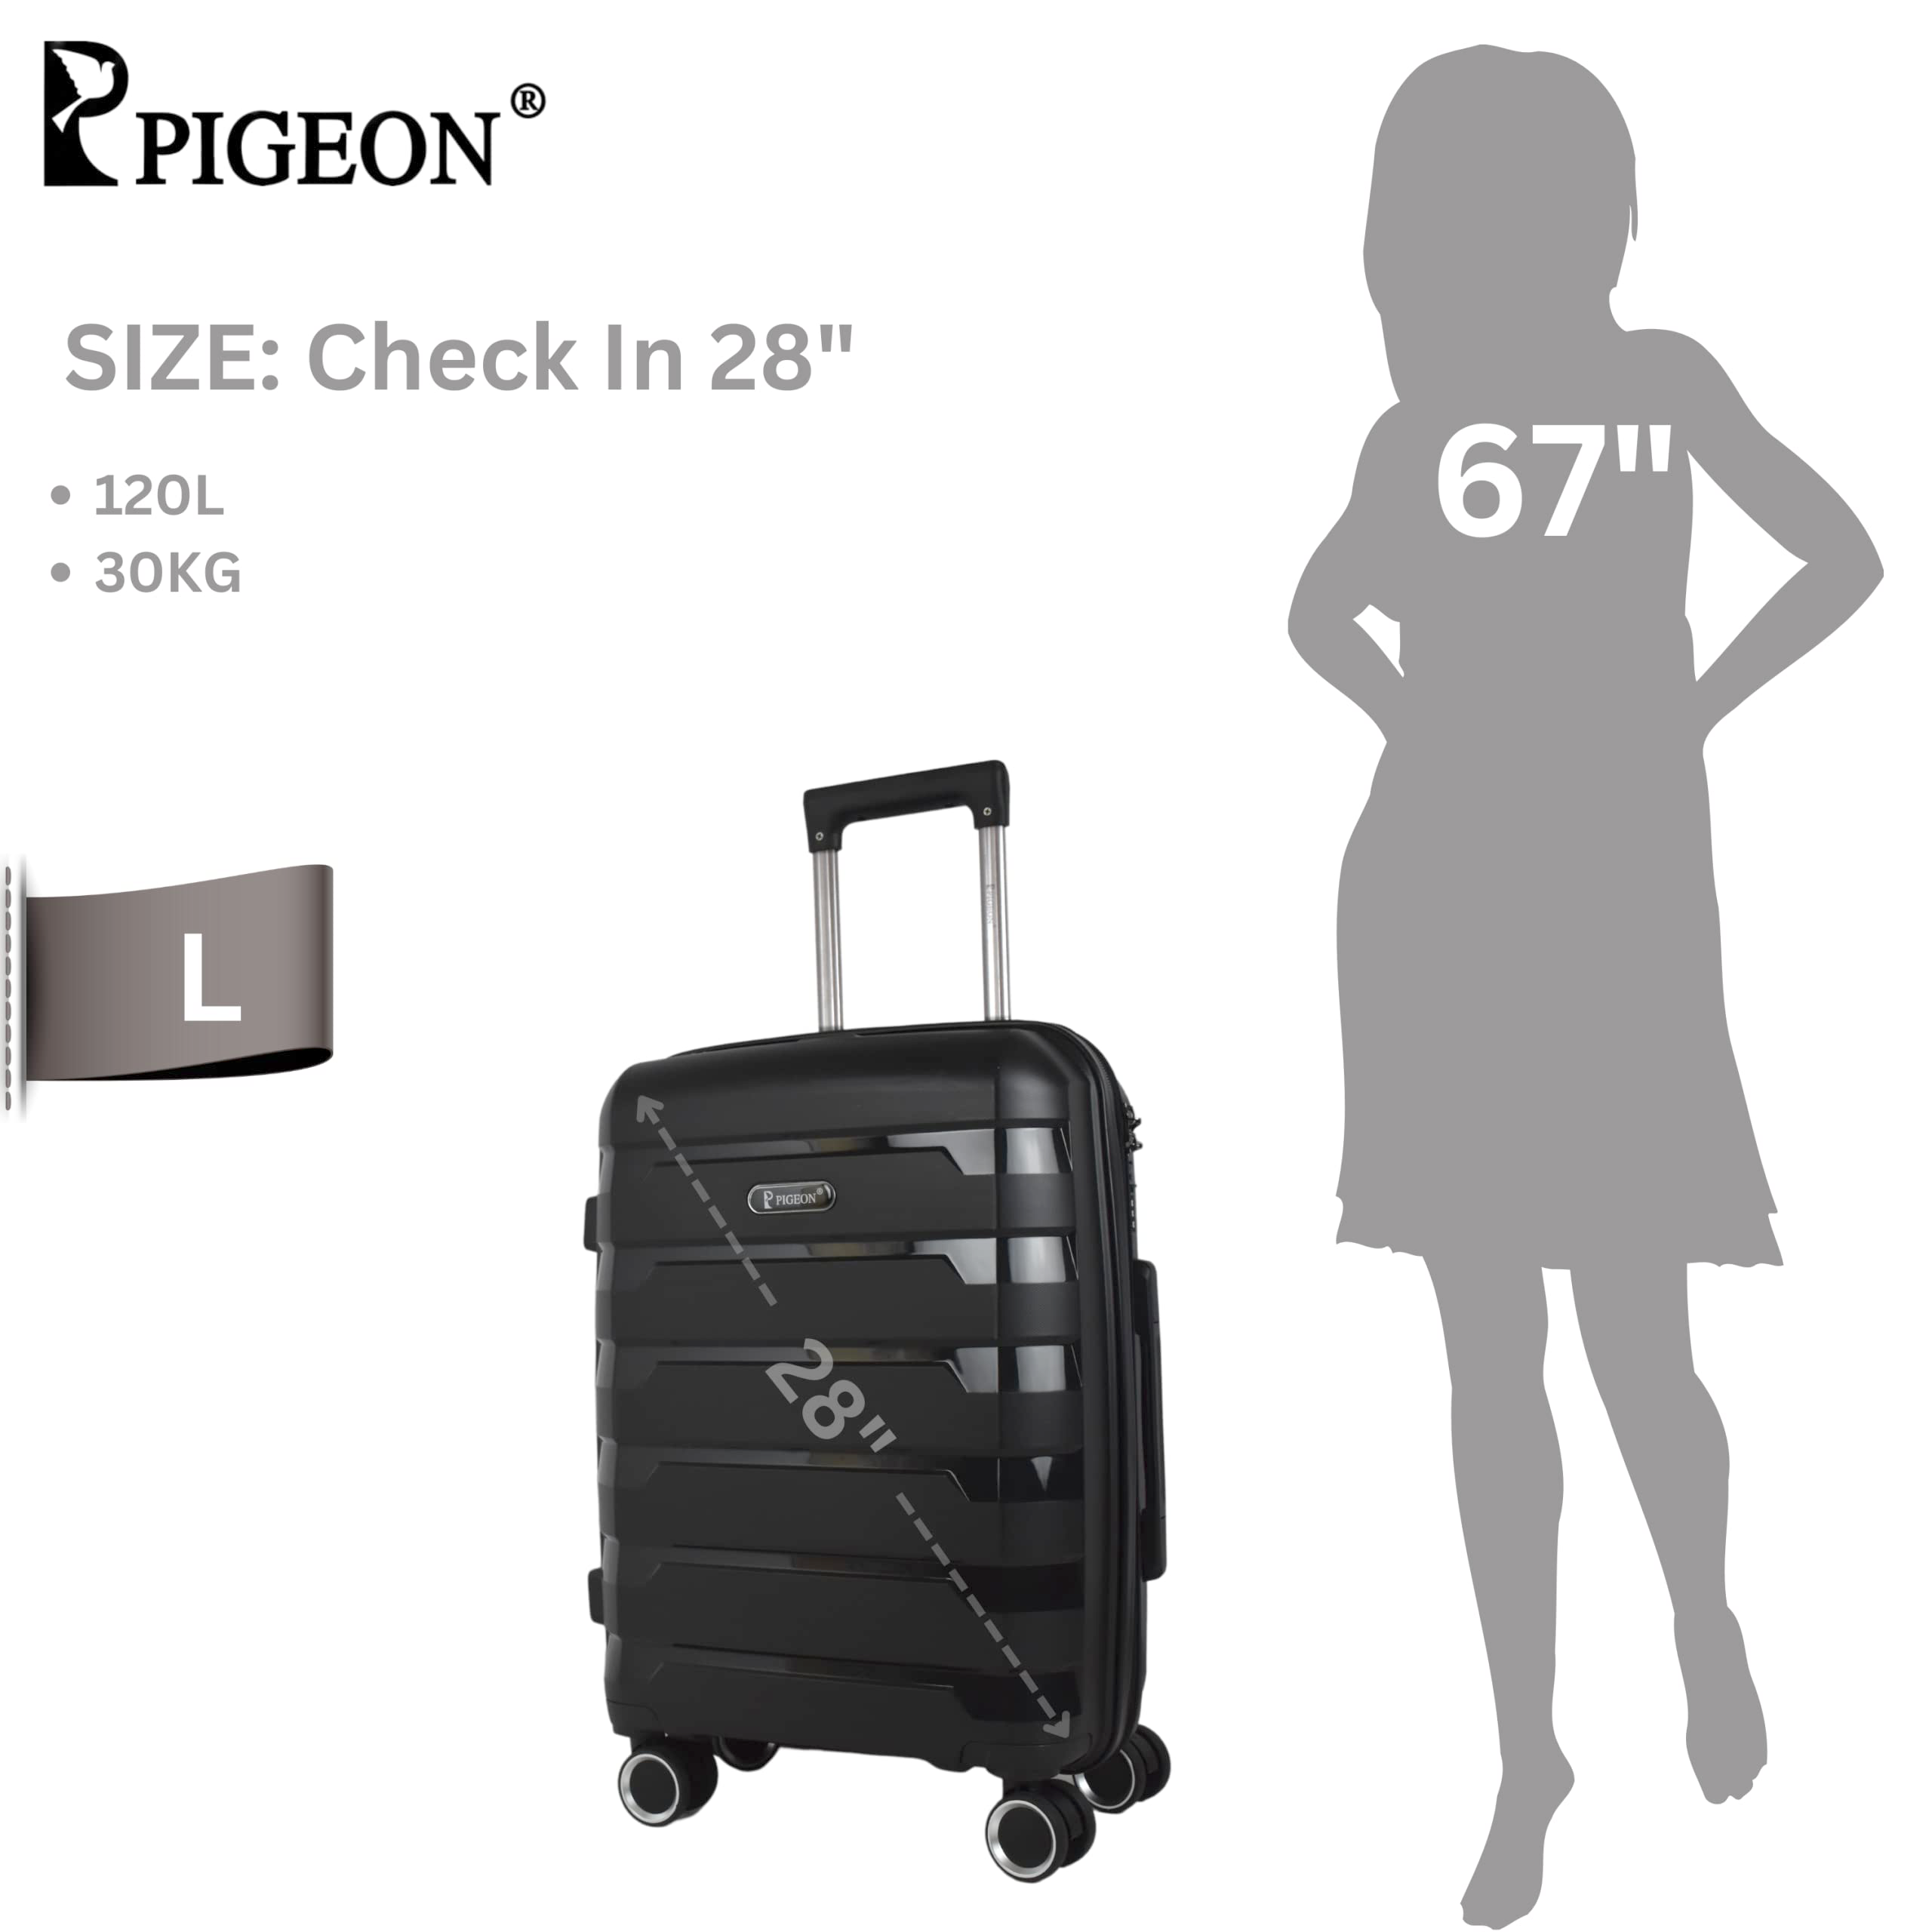 Pigeon hardshell trolley Carry on bag Poly propylene 20 inches